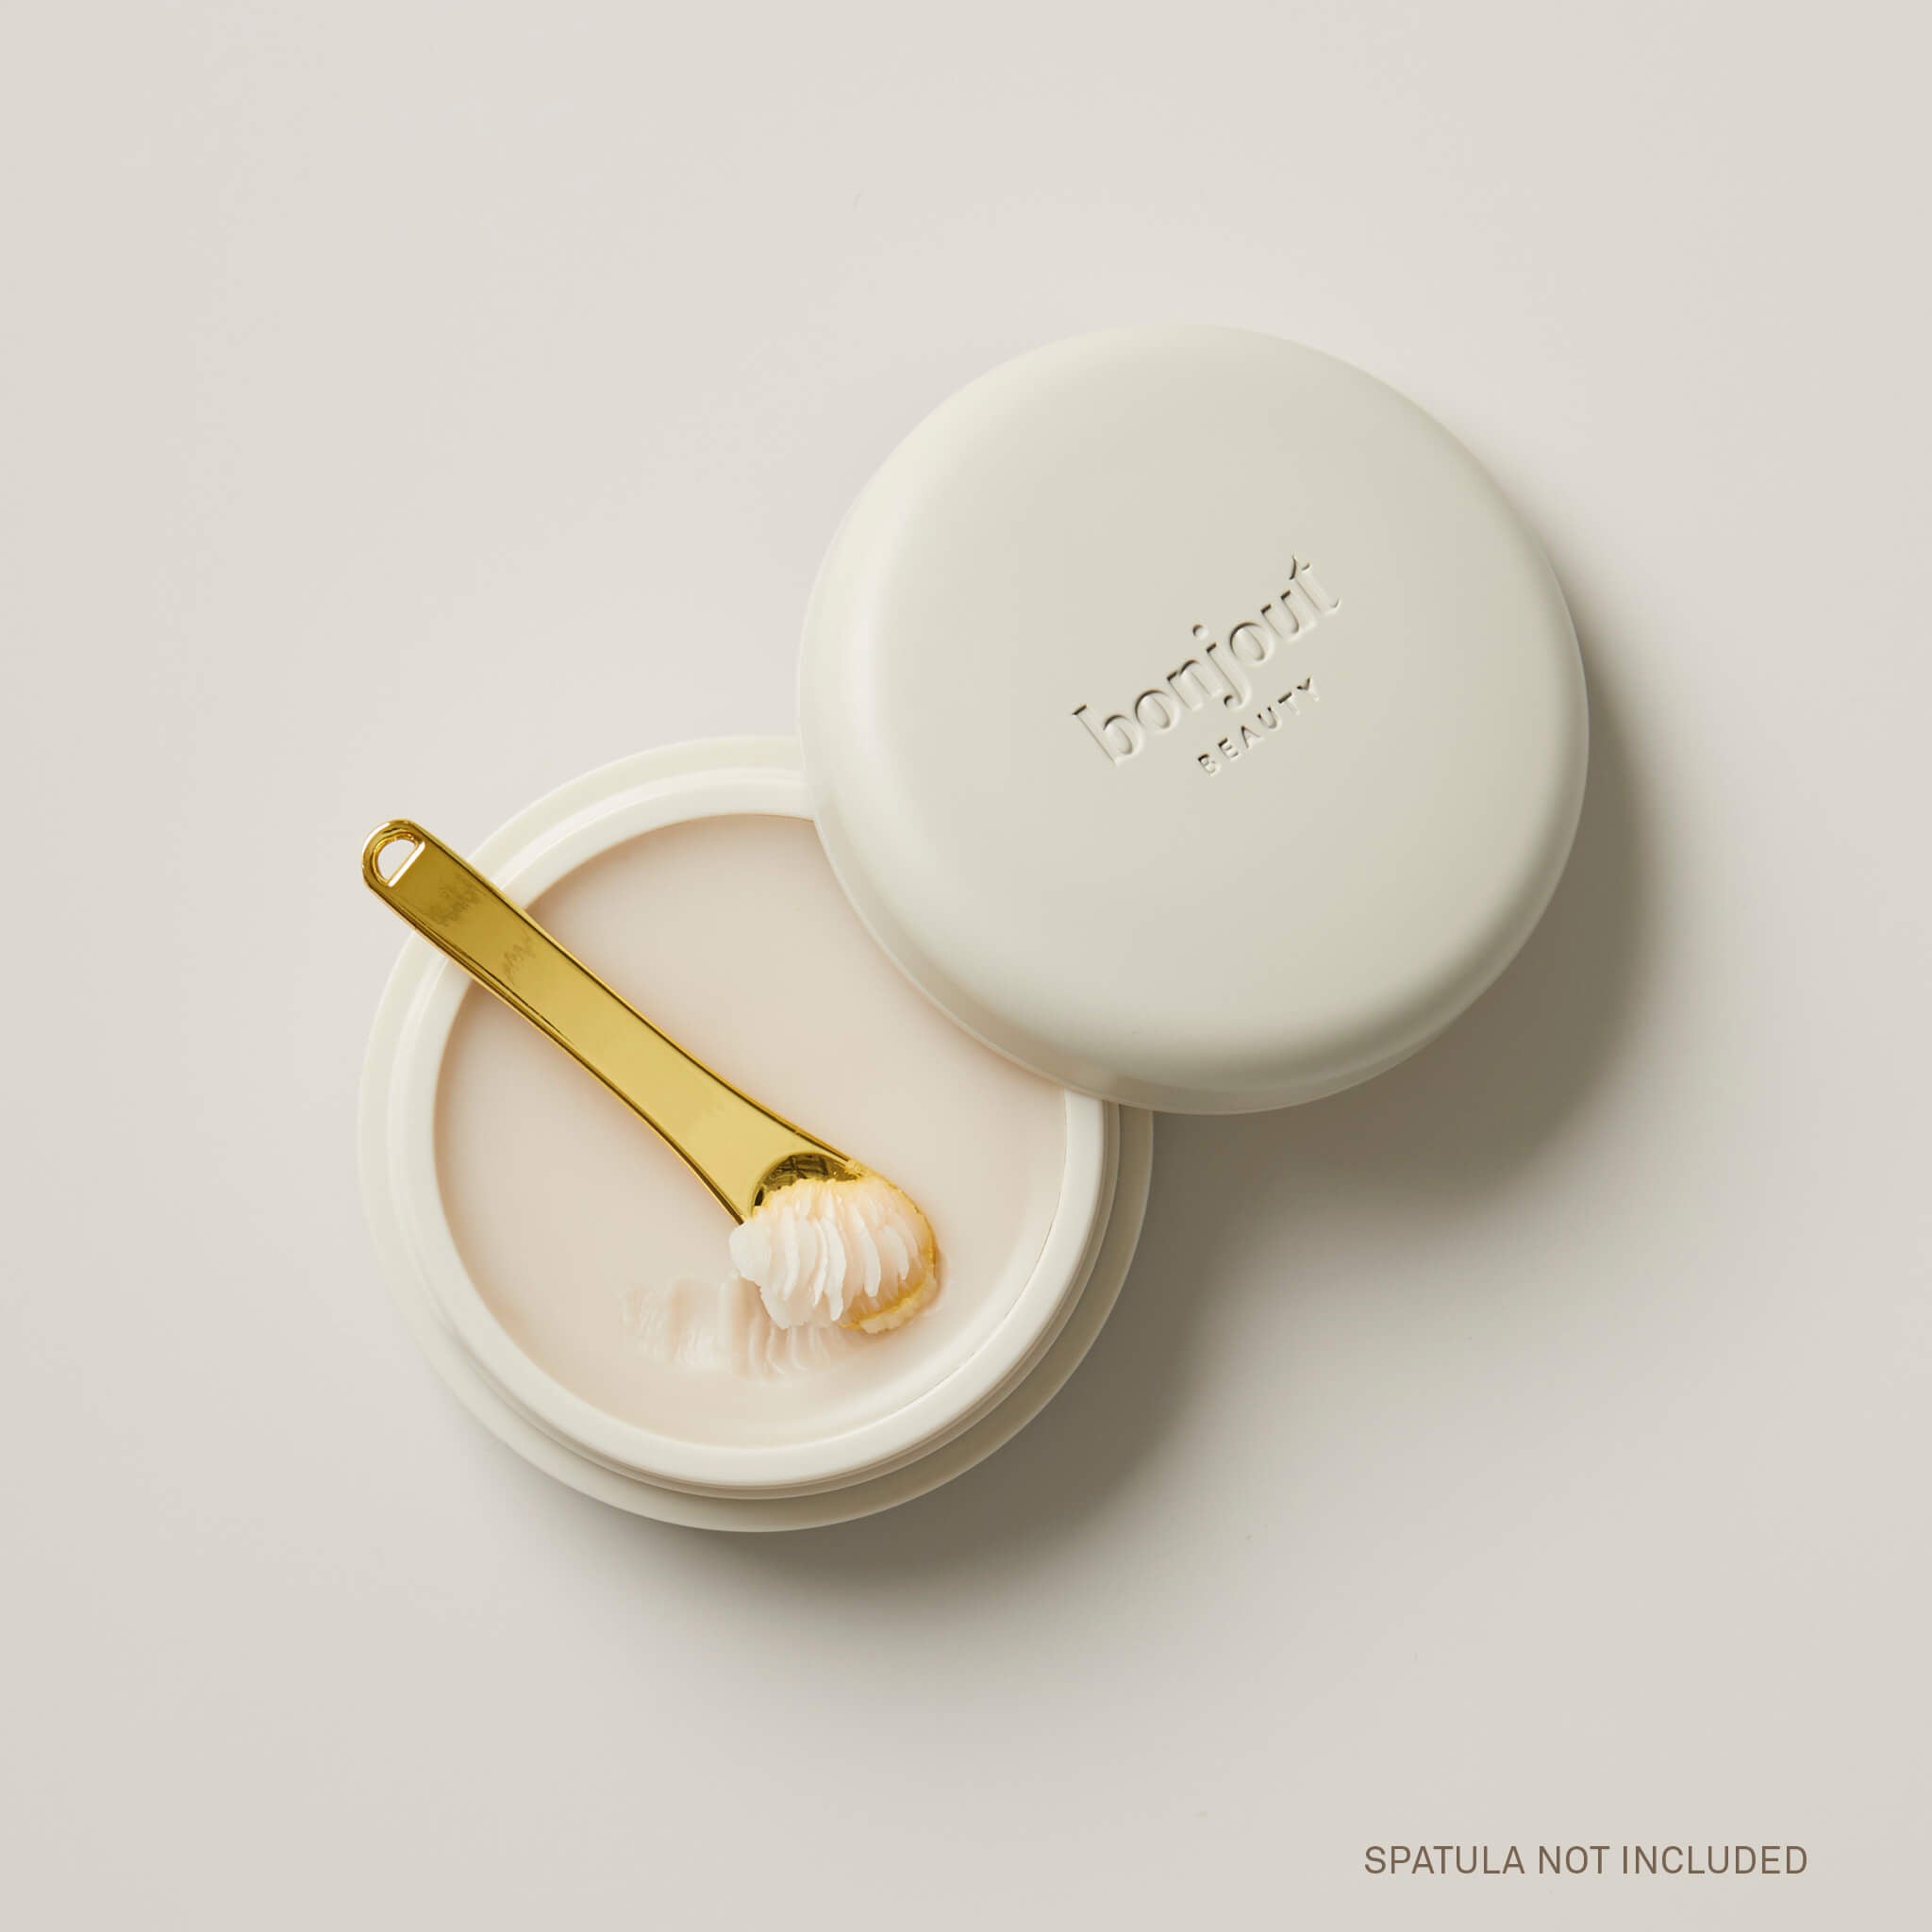 Bonjout Beauty&#39;s Le Balm product displayed open with golden spatula